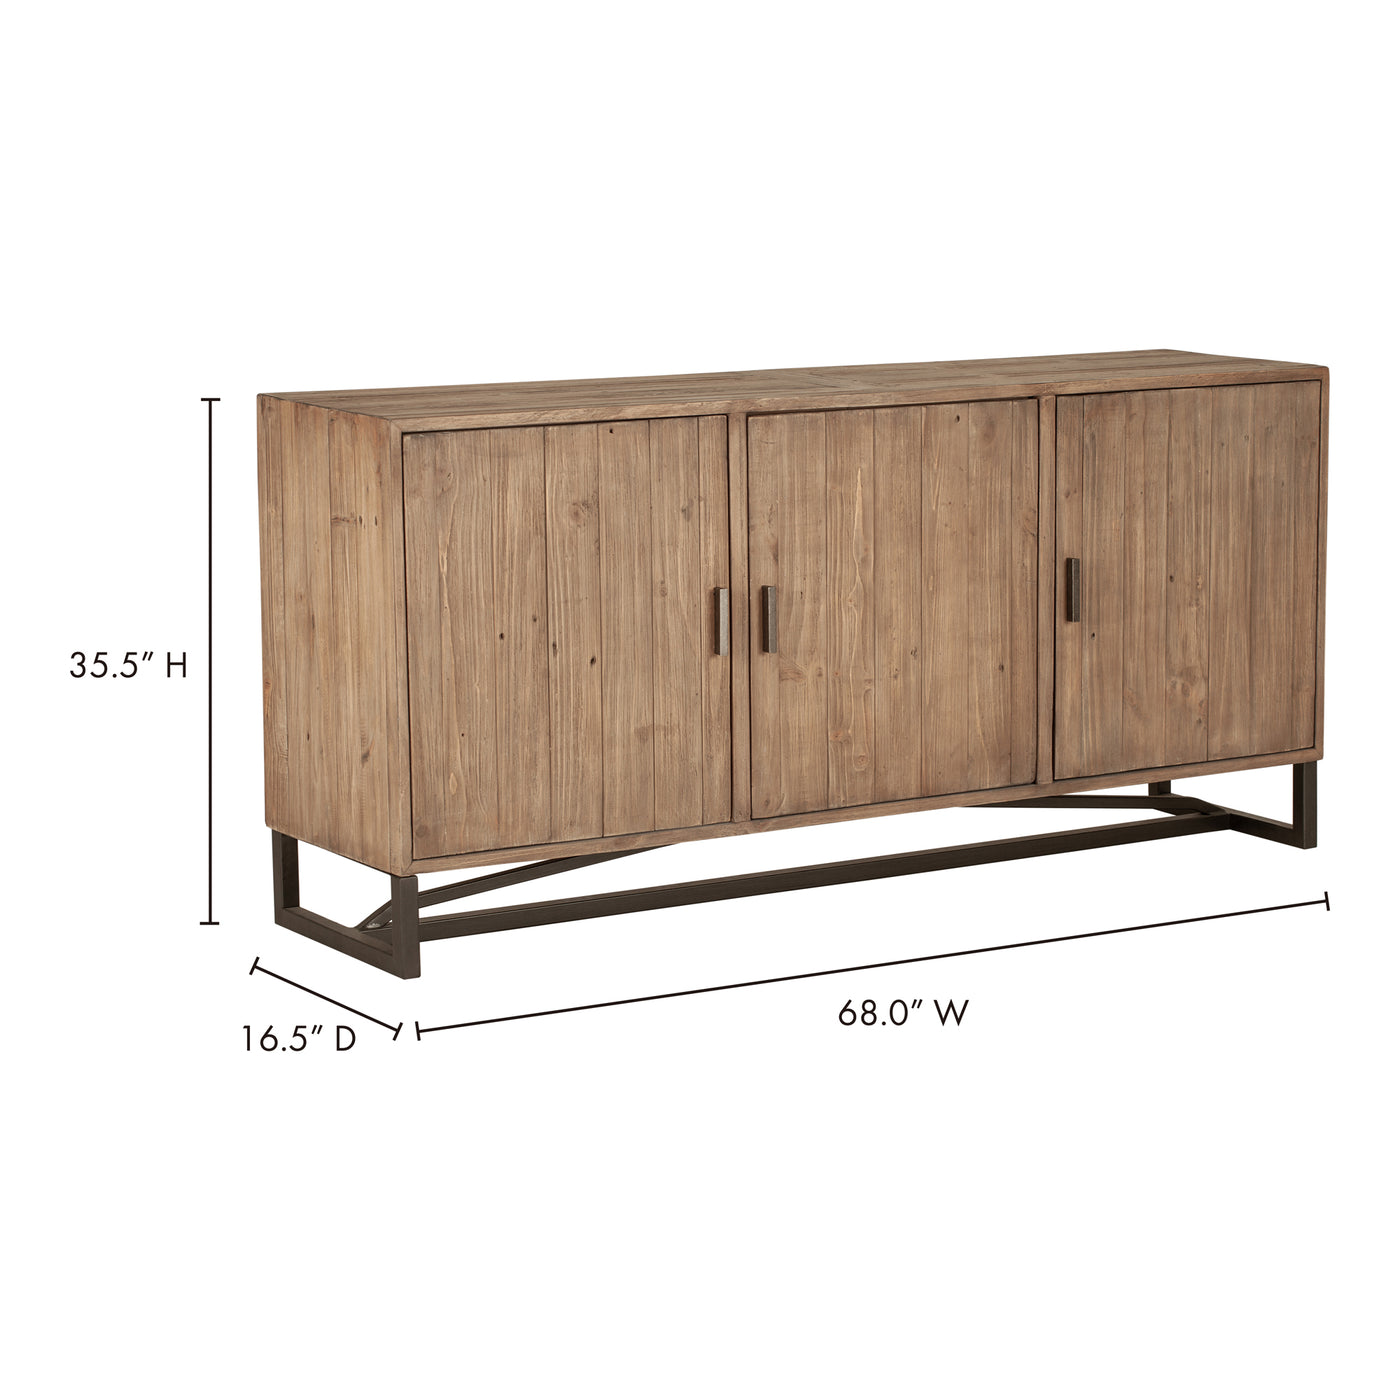 Made with solid reclaimed pine, the Sierra Sideboard exhibits natural woodgrain and knot variances.  Its six shelves provi...